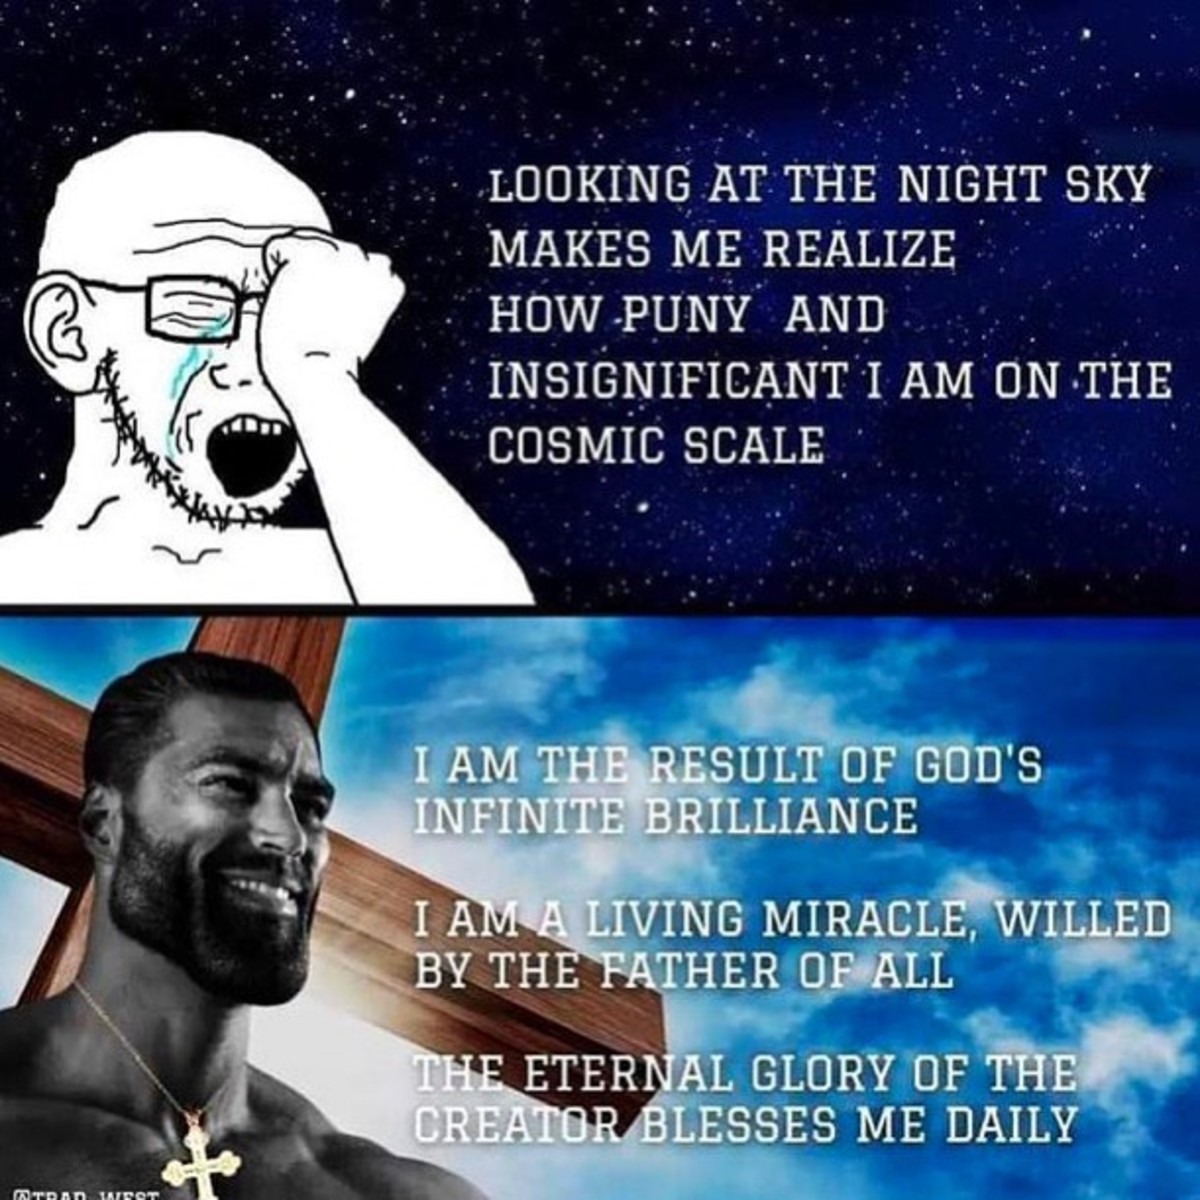 strongest athiest vs weakest true christian. .. Can we pretend that airplanes in the night sky are like shooting stars?